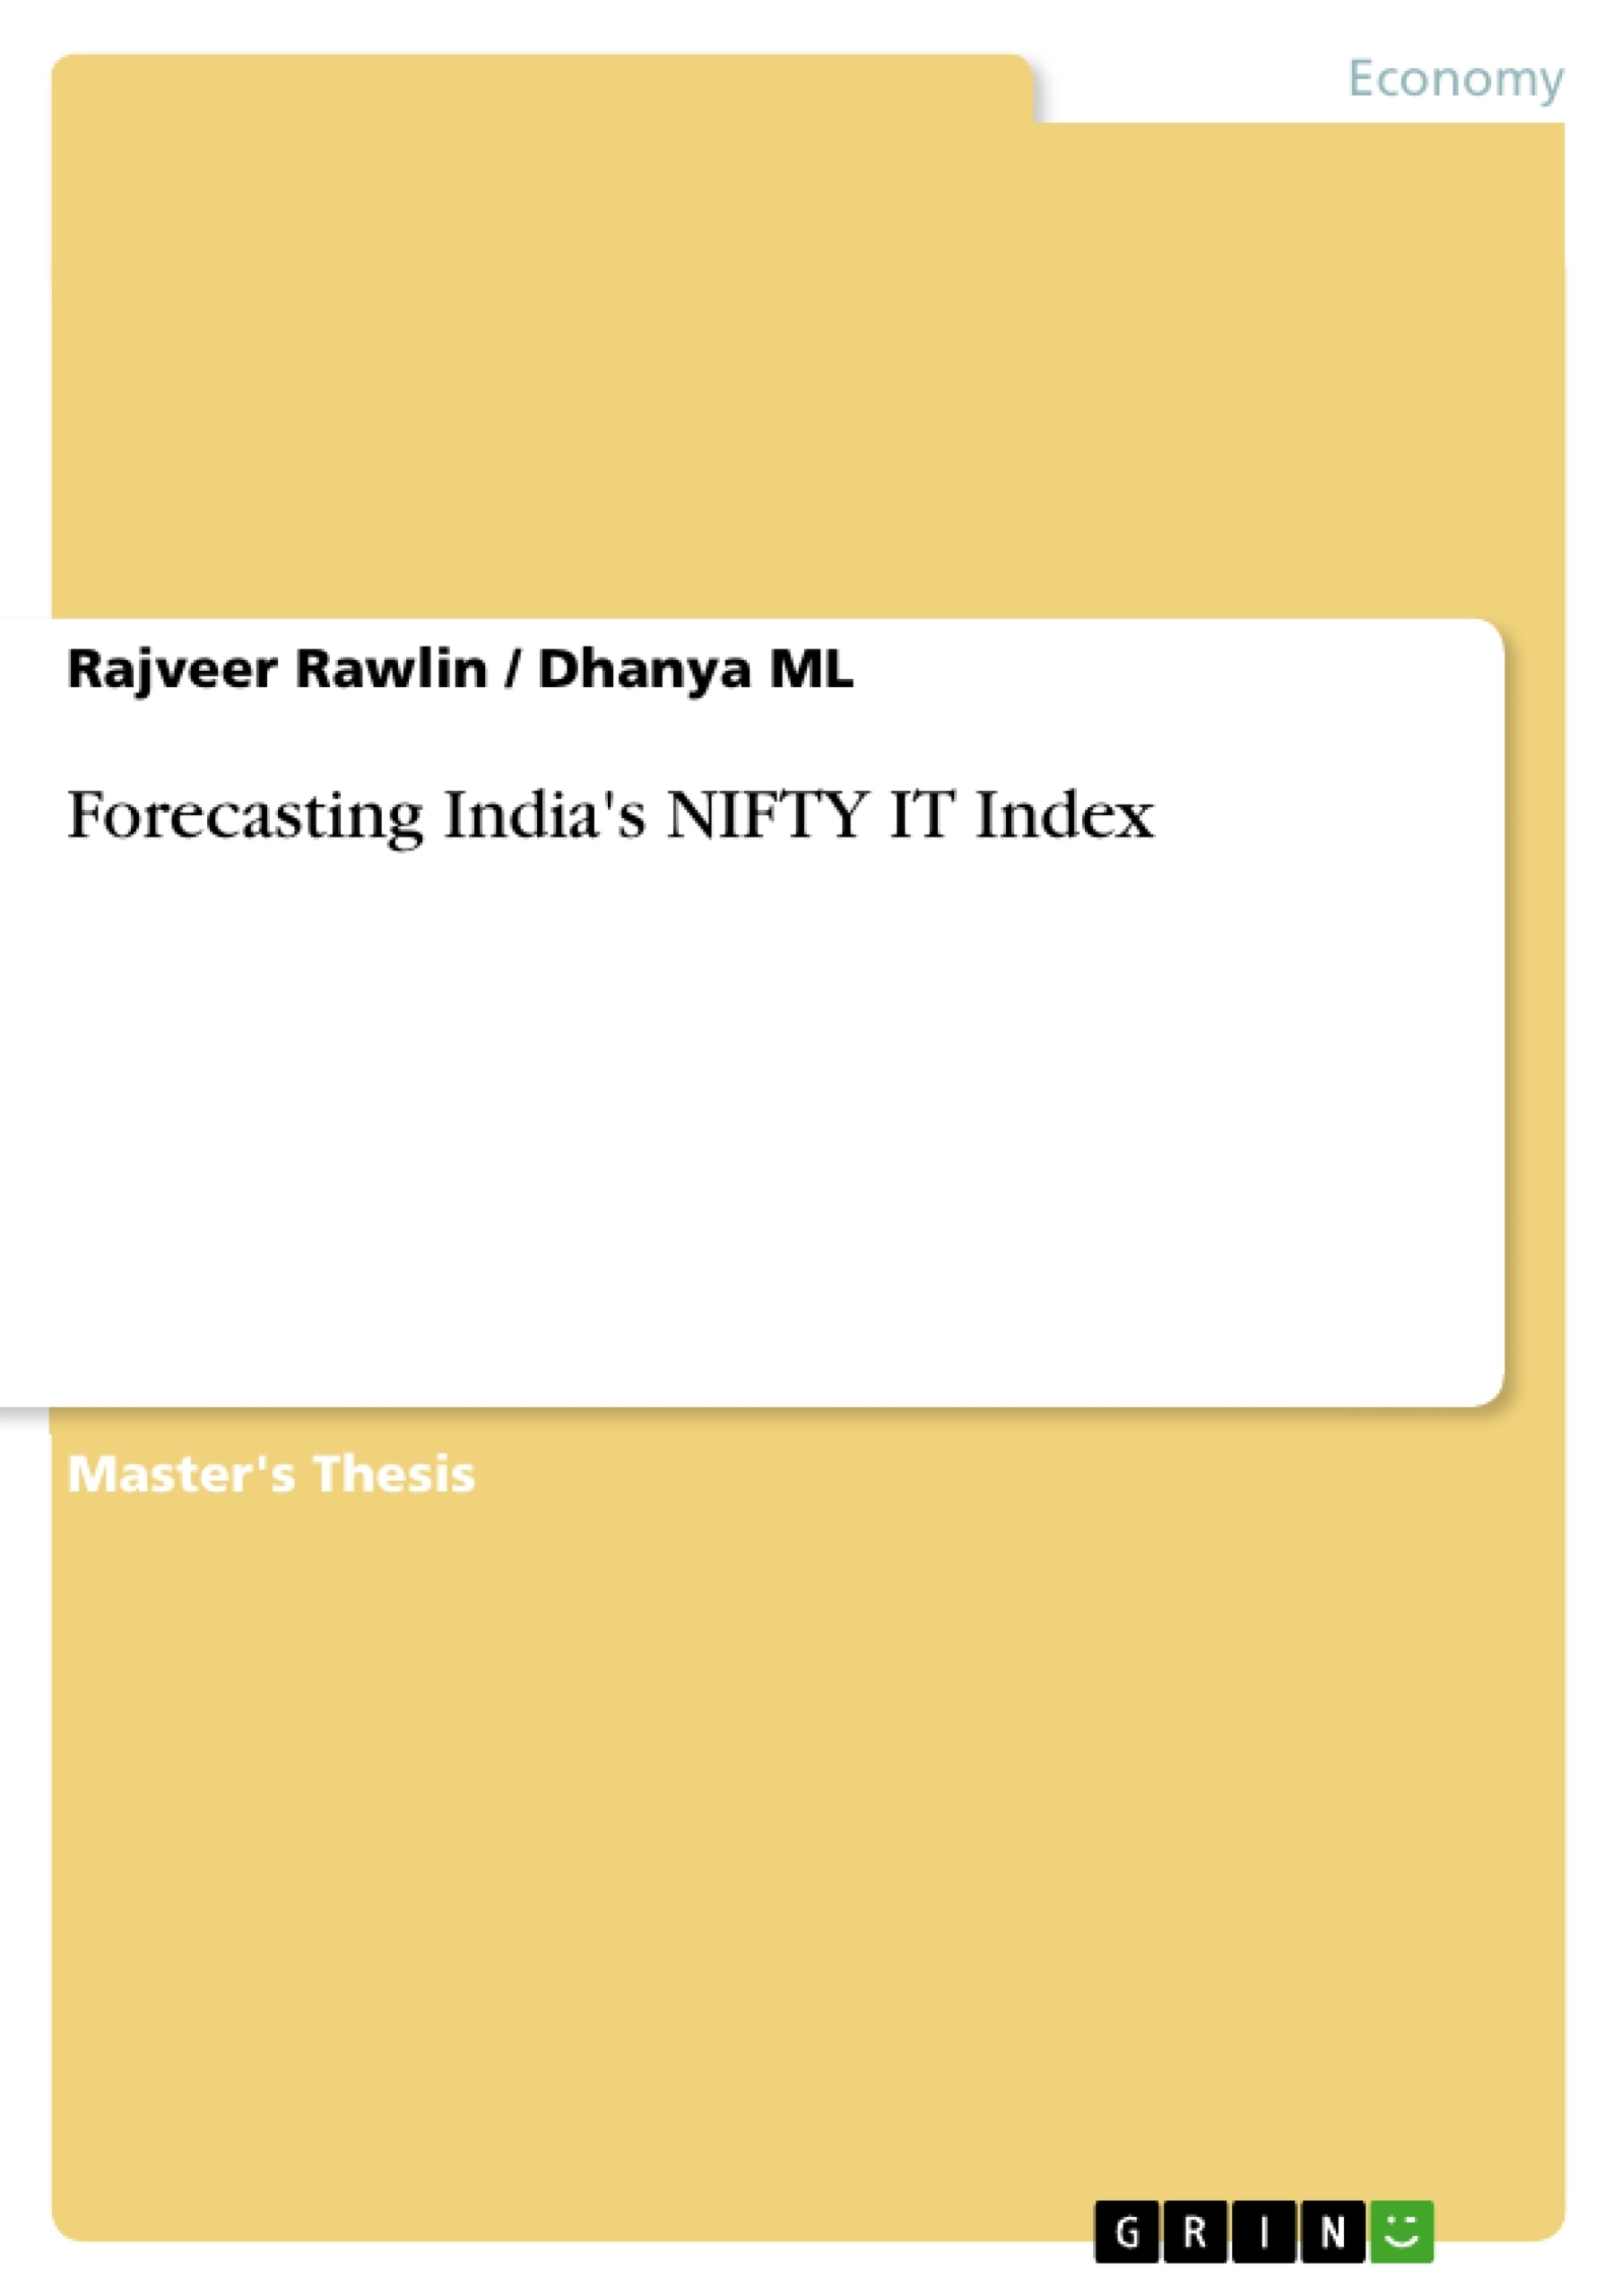 Title: Forecasting India's NIFTY IT Index